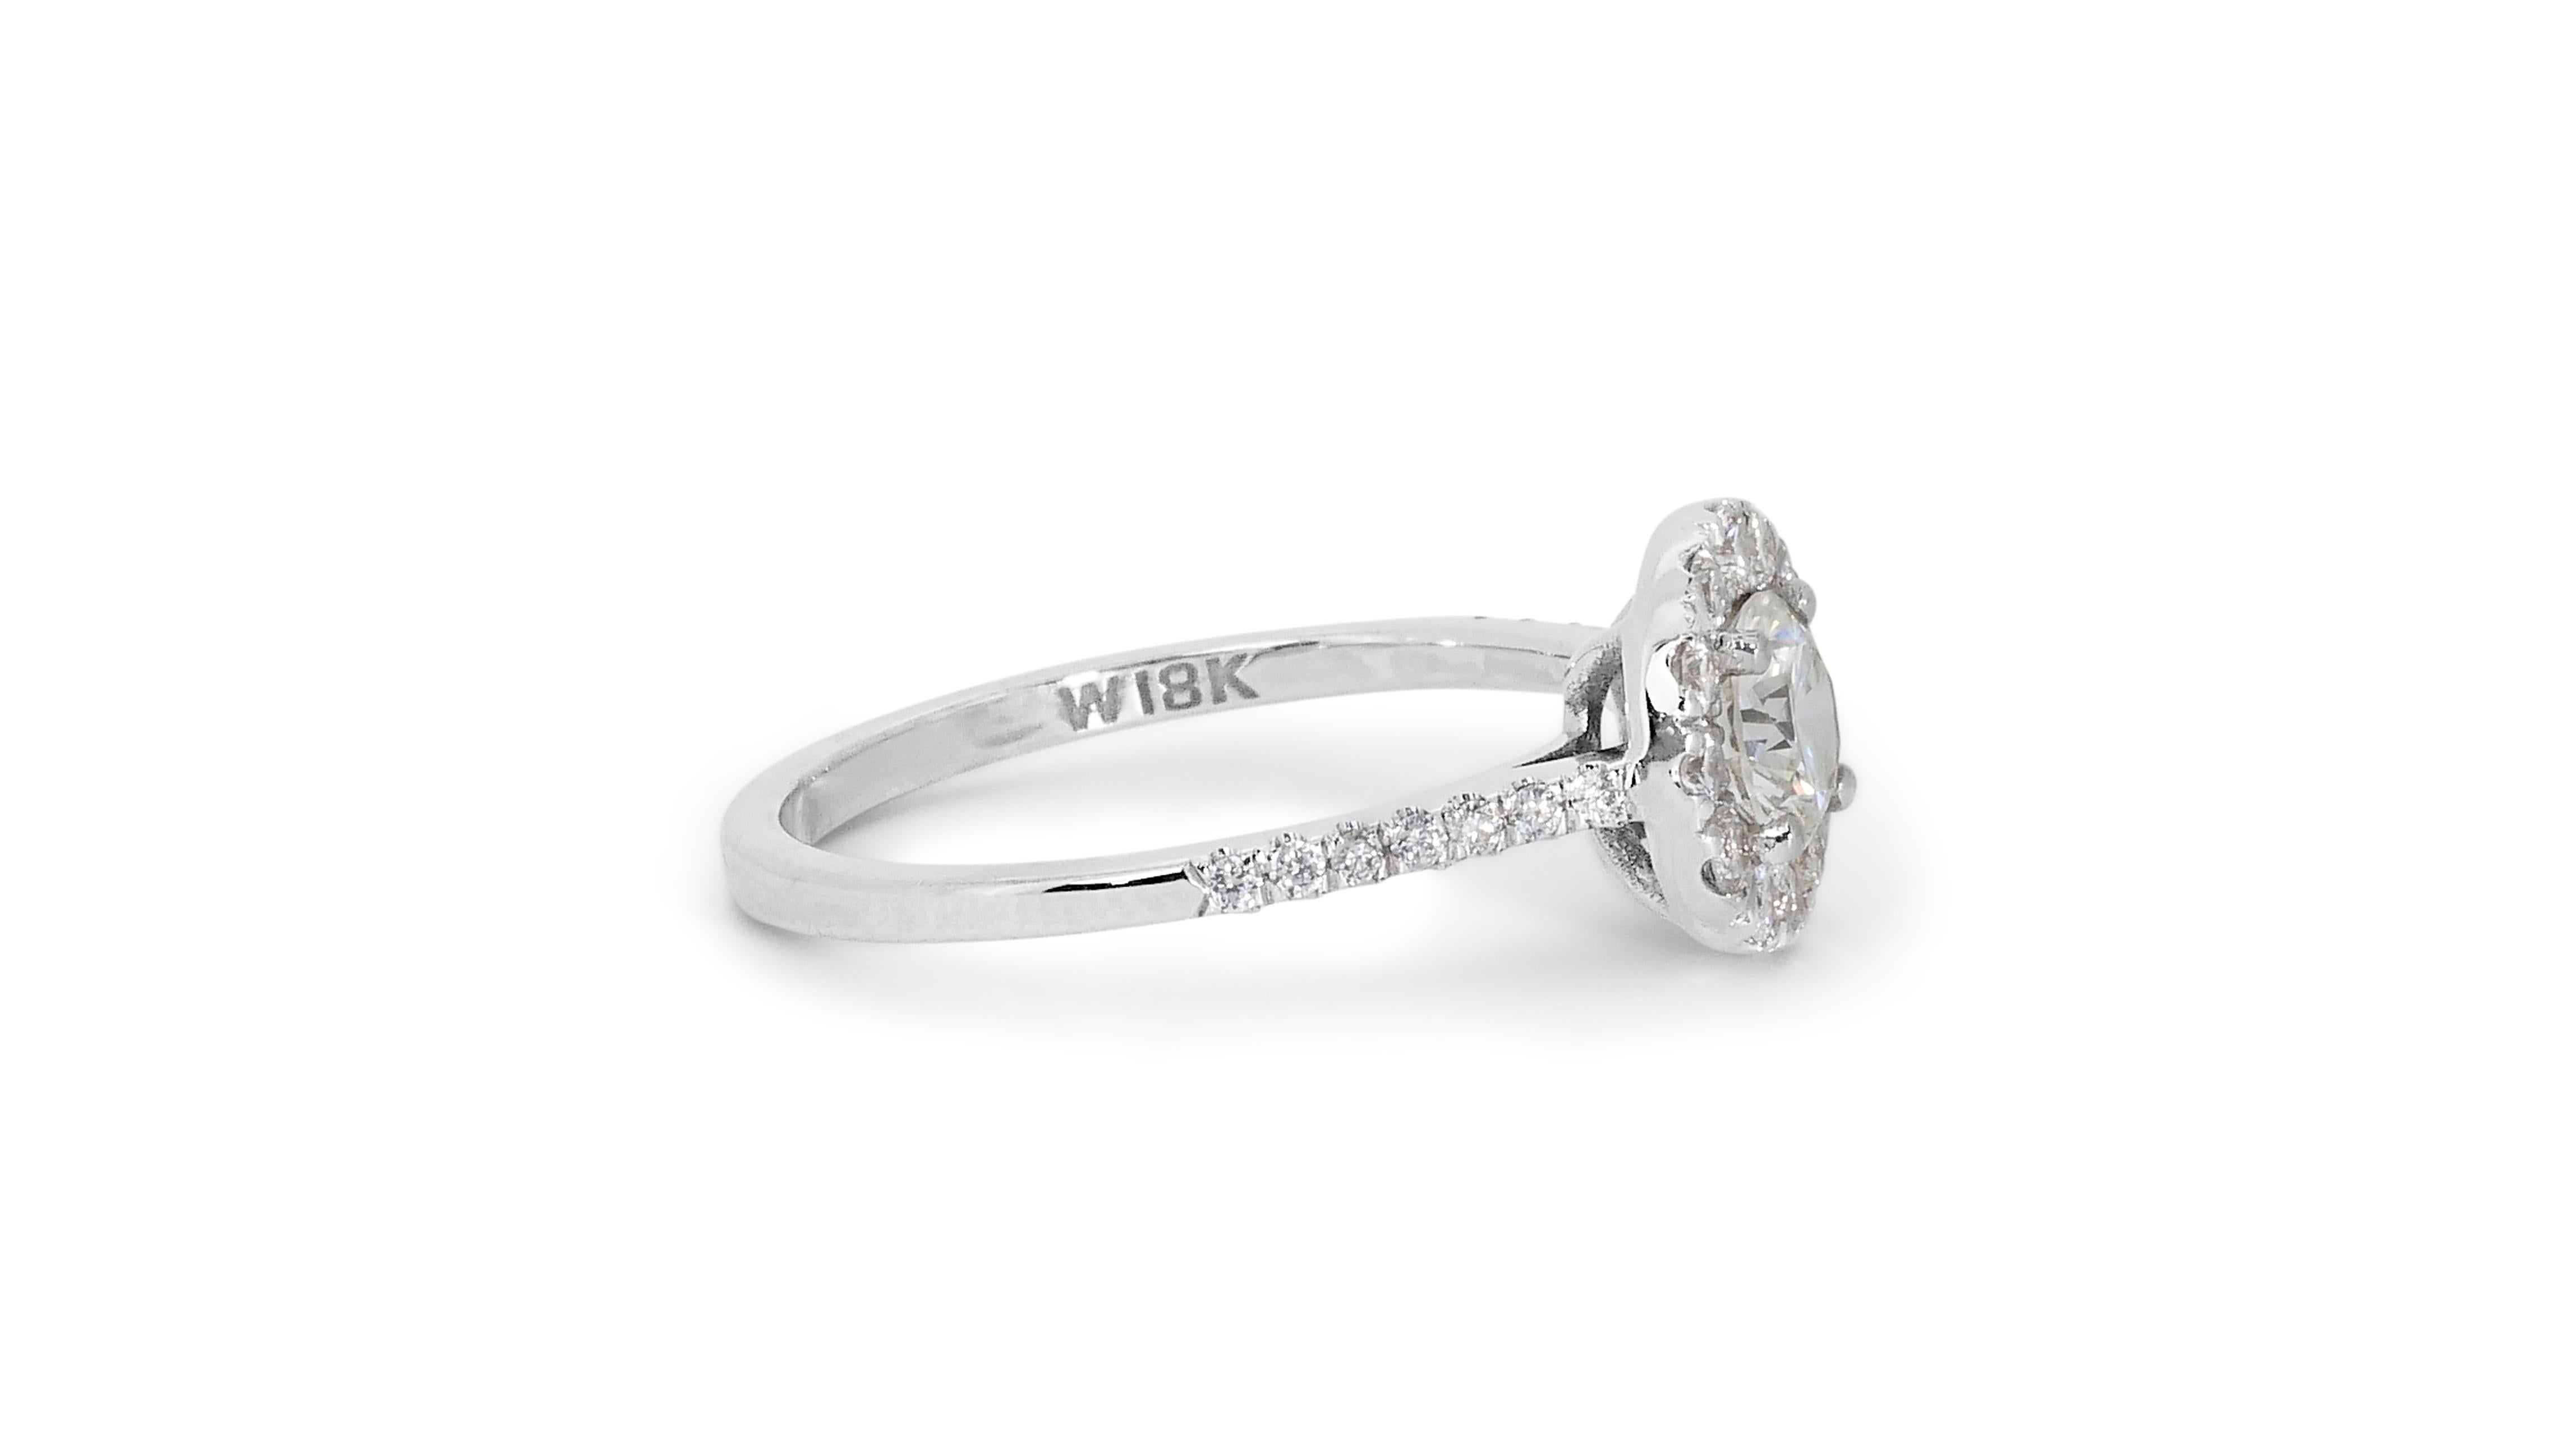 Glamorous 1.30ct Diamonds Halo Ring in 18k White Gold - GIA Certified For Sale 2